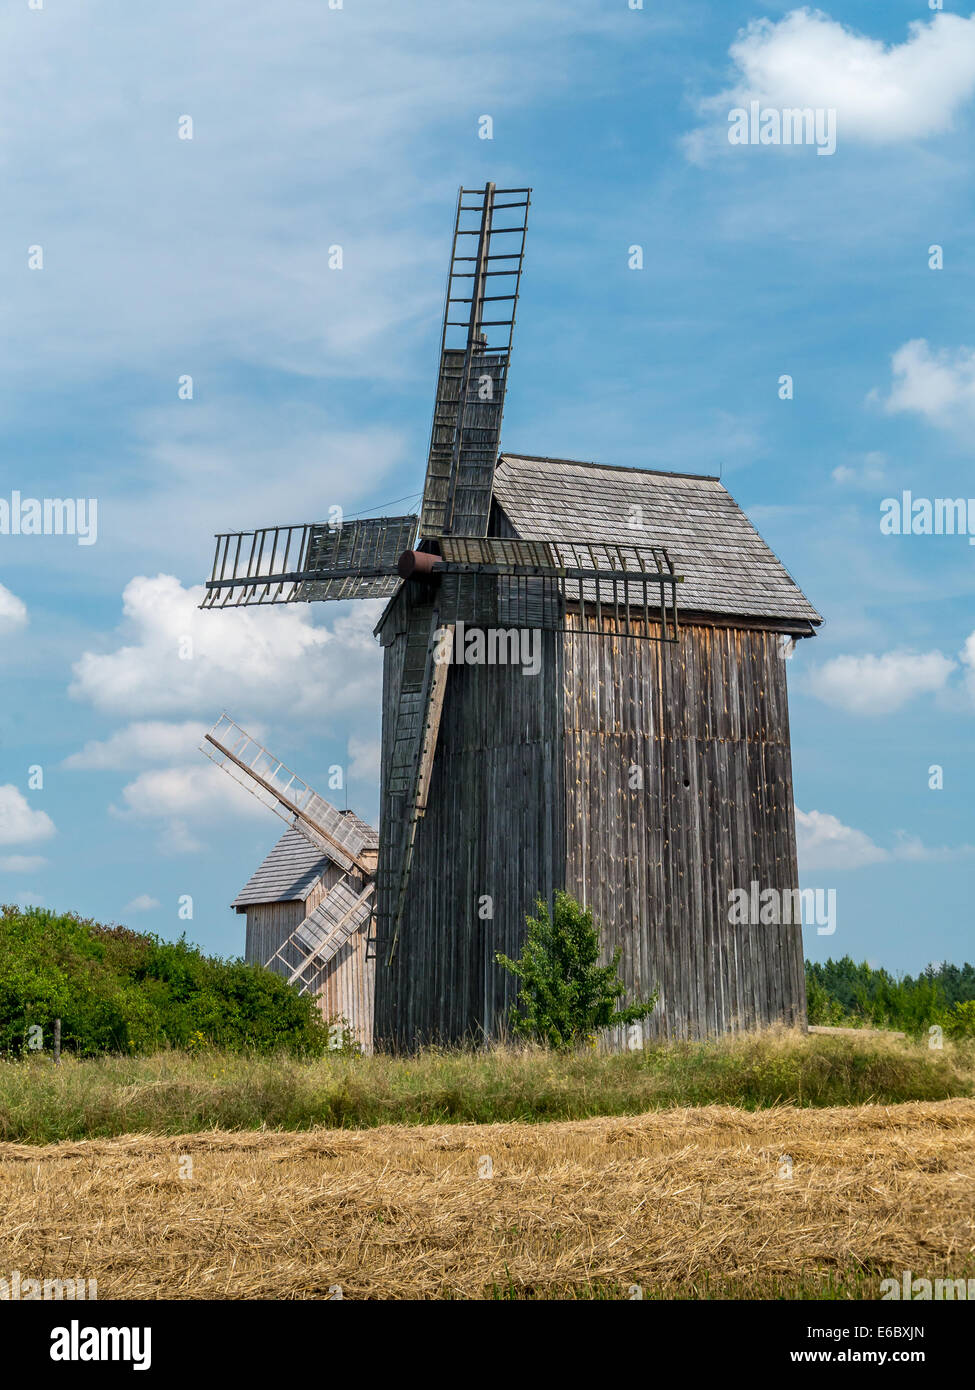 Two old wooden windmills against blue sky Stock Photo